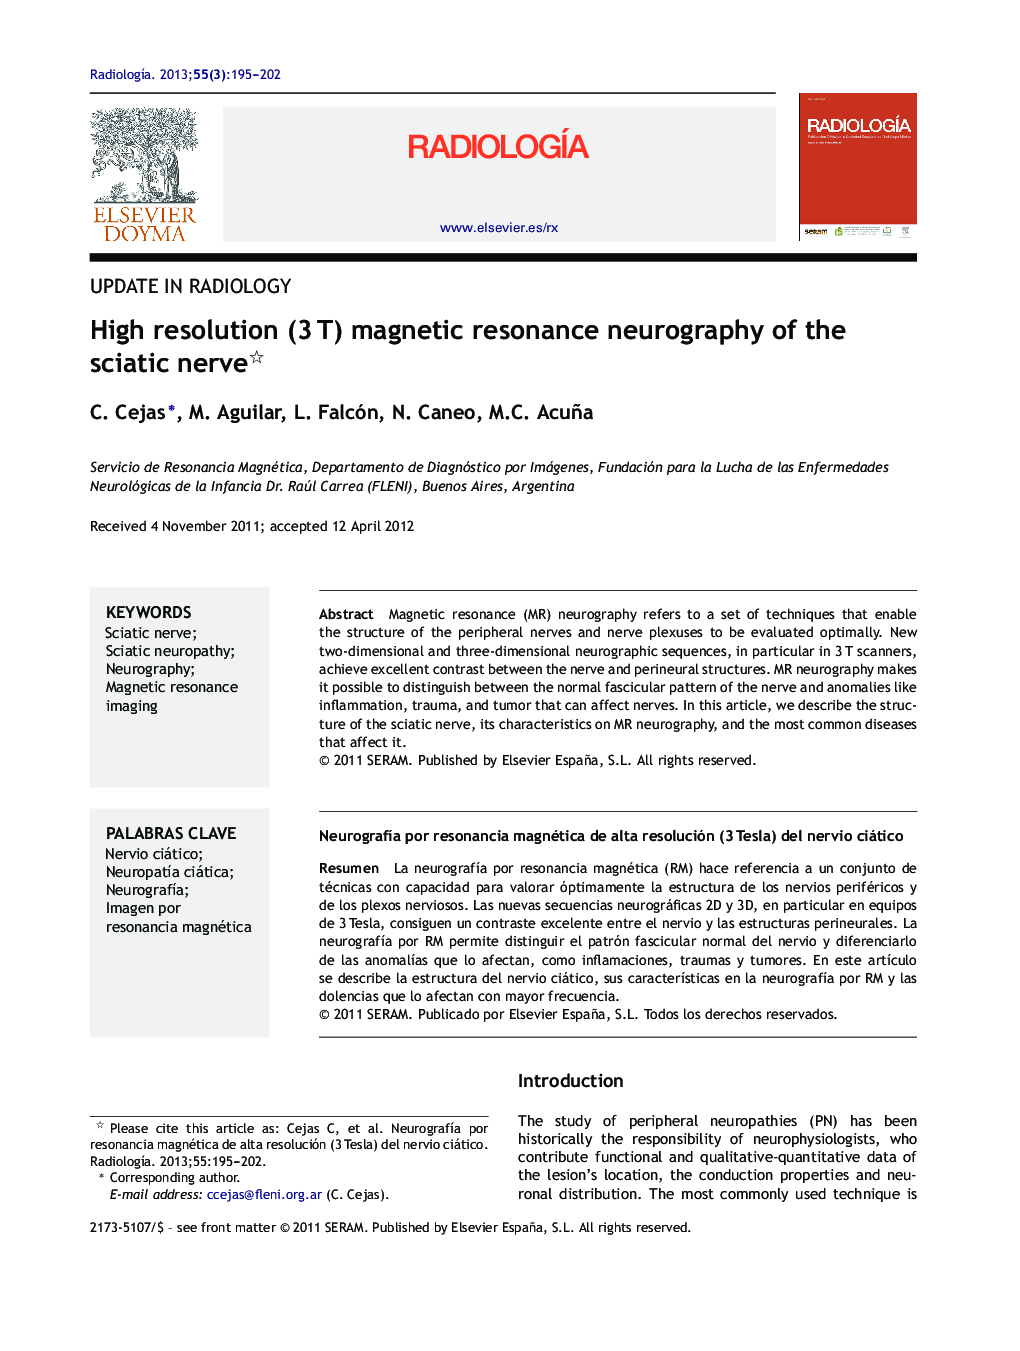 High resolution (3 T) magnetic resonance neurography of the sciatic nerve 